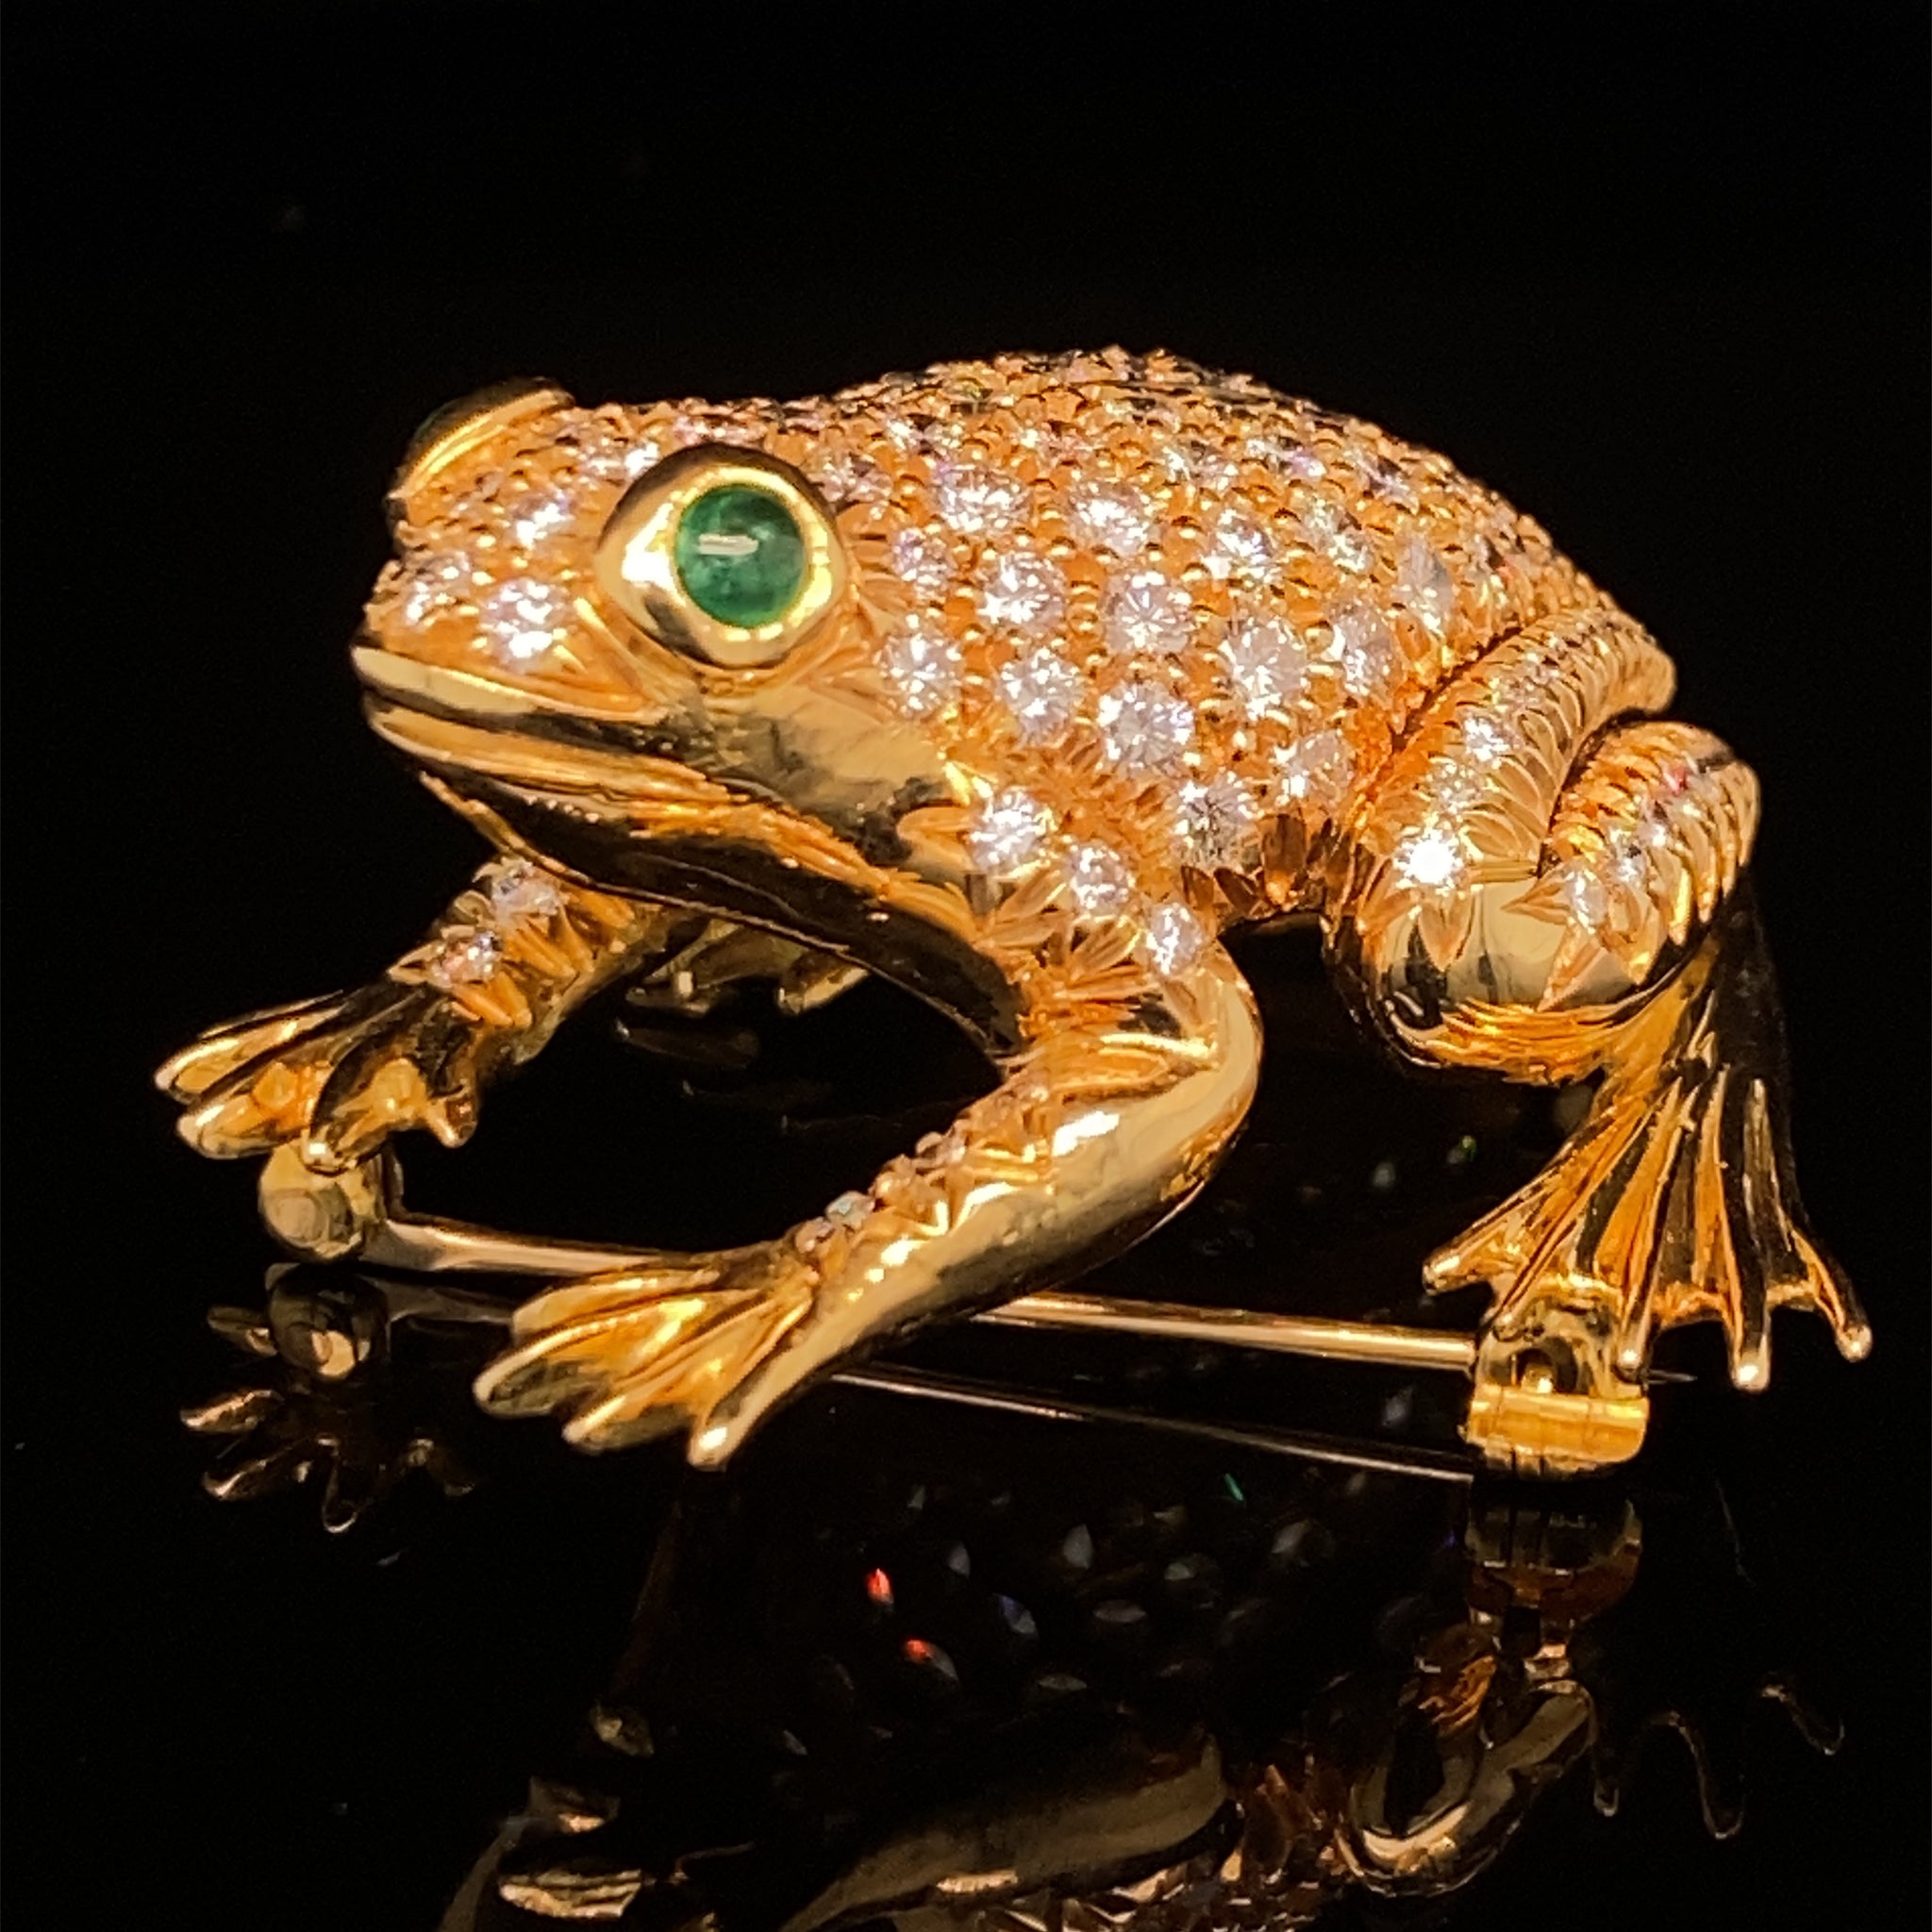 Frog, large Frog with Diamond encrusted body – 18K Gold Animal